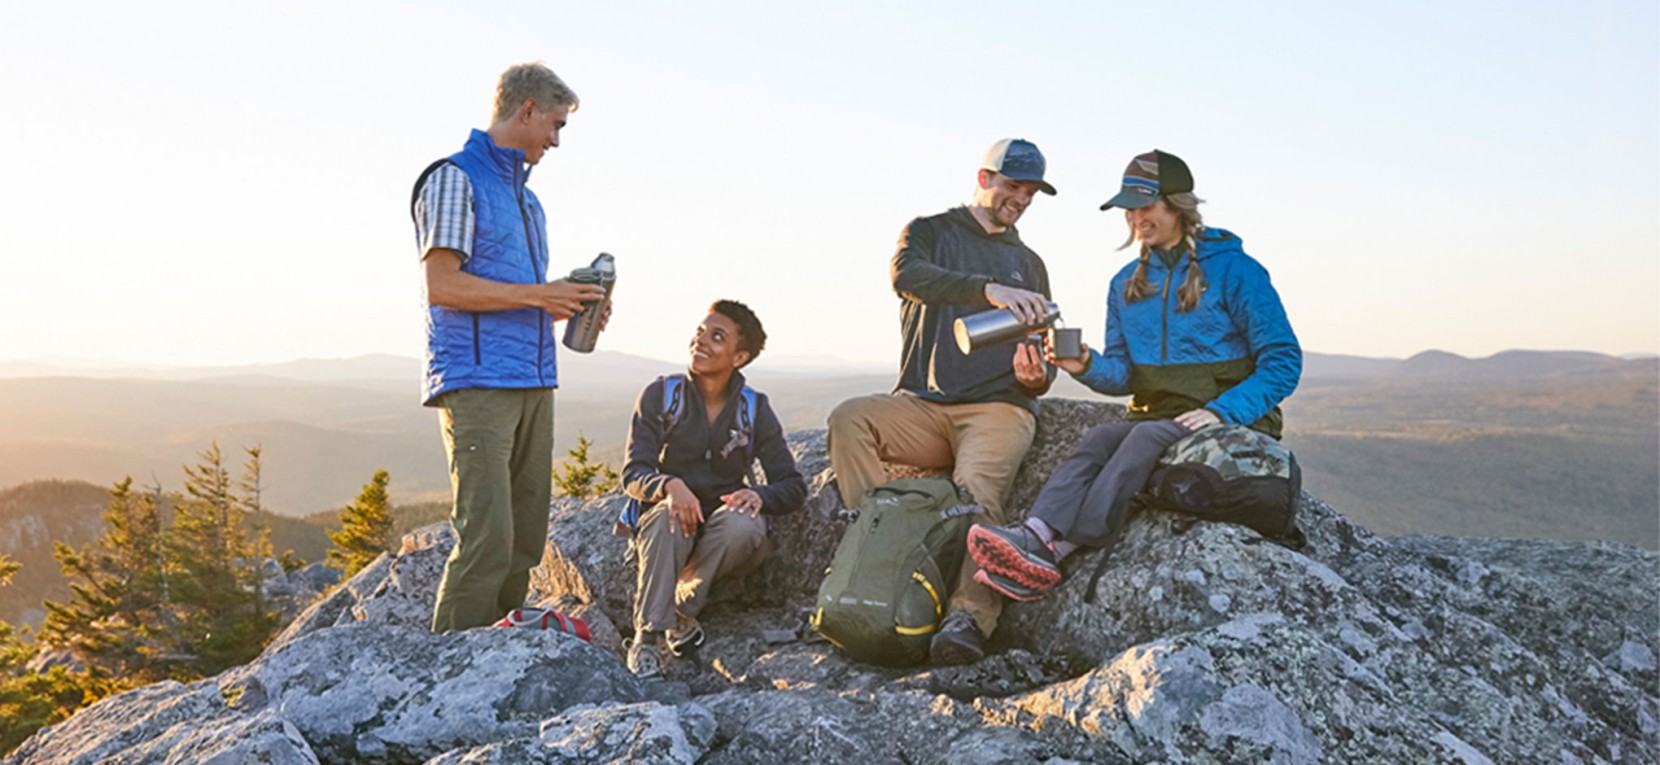 A group of 4 hikers stop for a water break on top of a mountain.